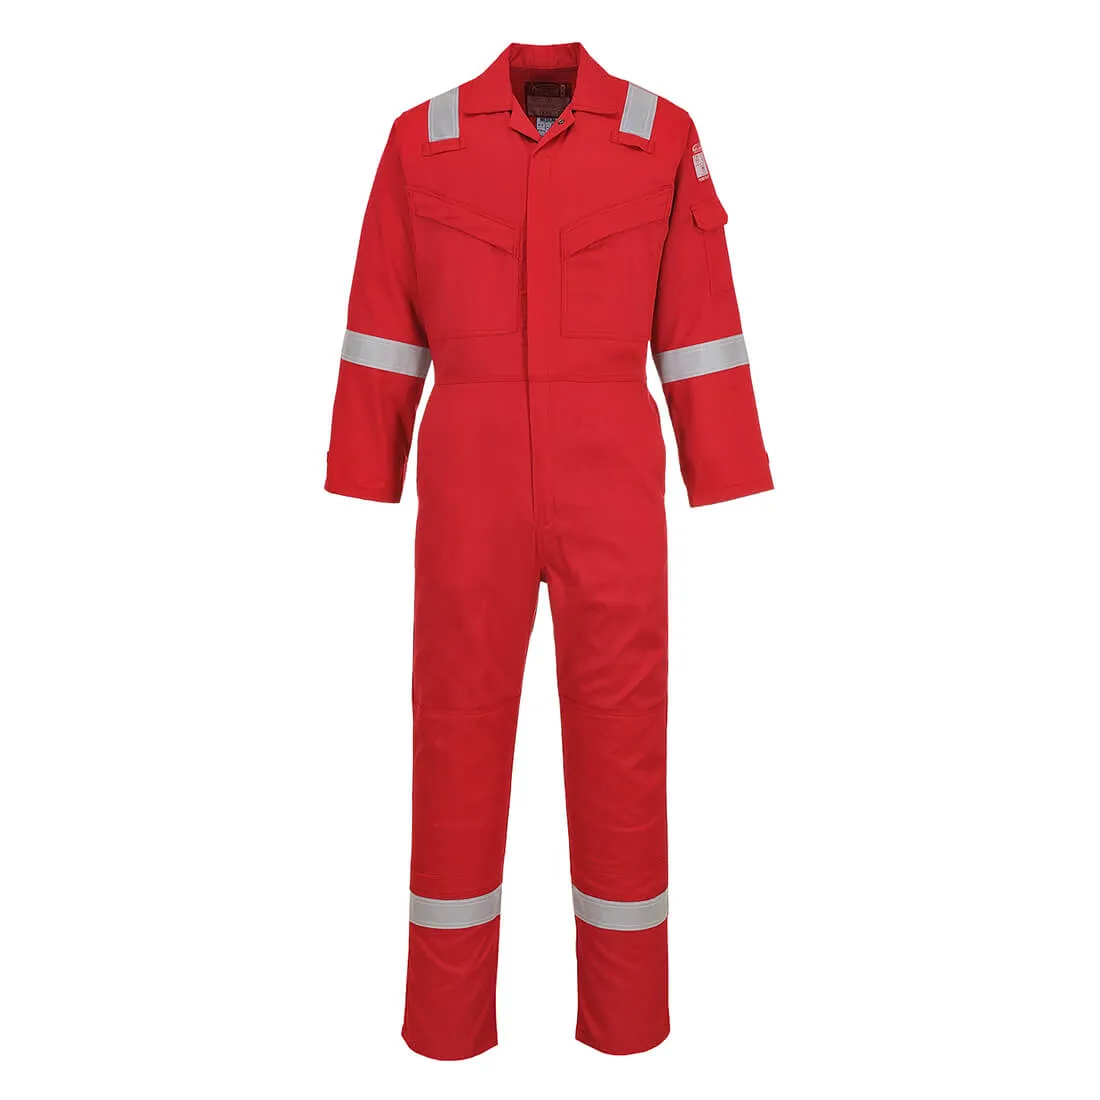 Biz Flame Mens Flame Resistant Super Lightweight Antistatic Coverall - Red, Large, 32"